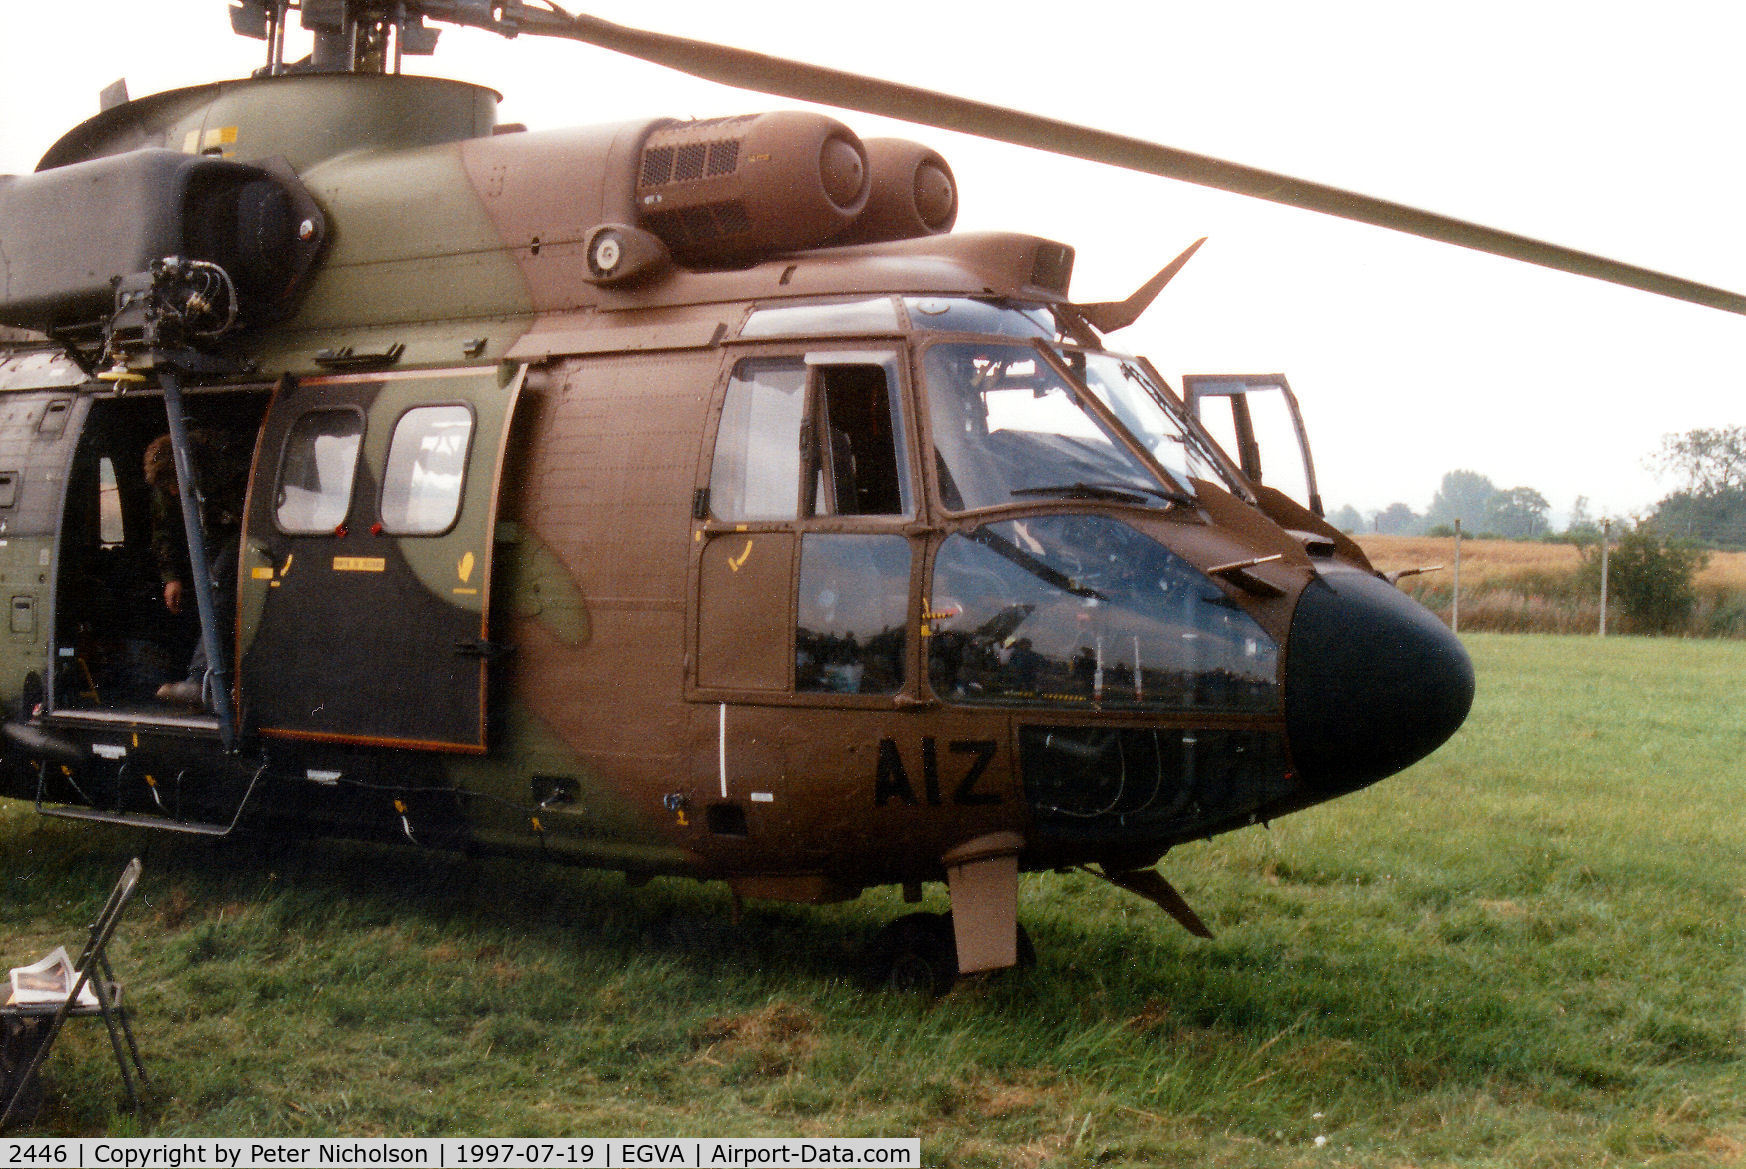 2446, Aérospatiale AS-532UL Cougar C/N 2446, AS.532UL Cougar, callsign FMY 8455, of French Army's 4 RHCM on display at the 1997 Intnl Air Tattoo at RAF Fairford.